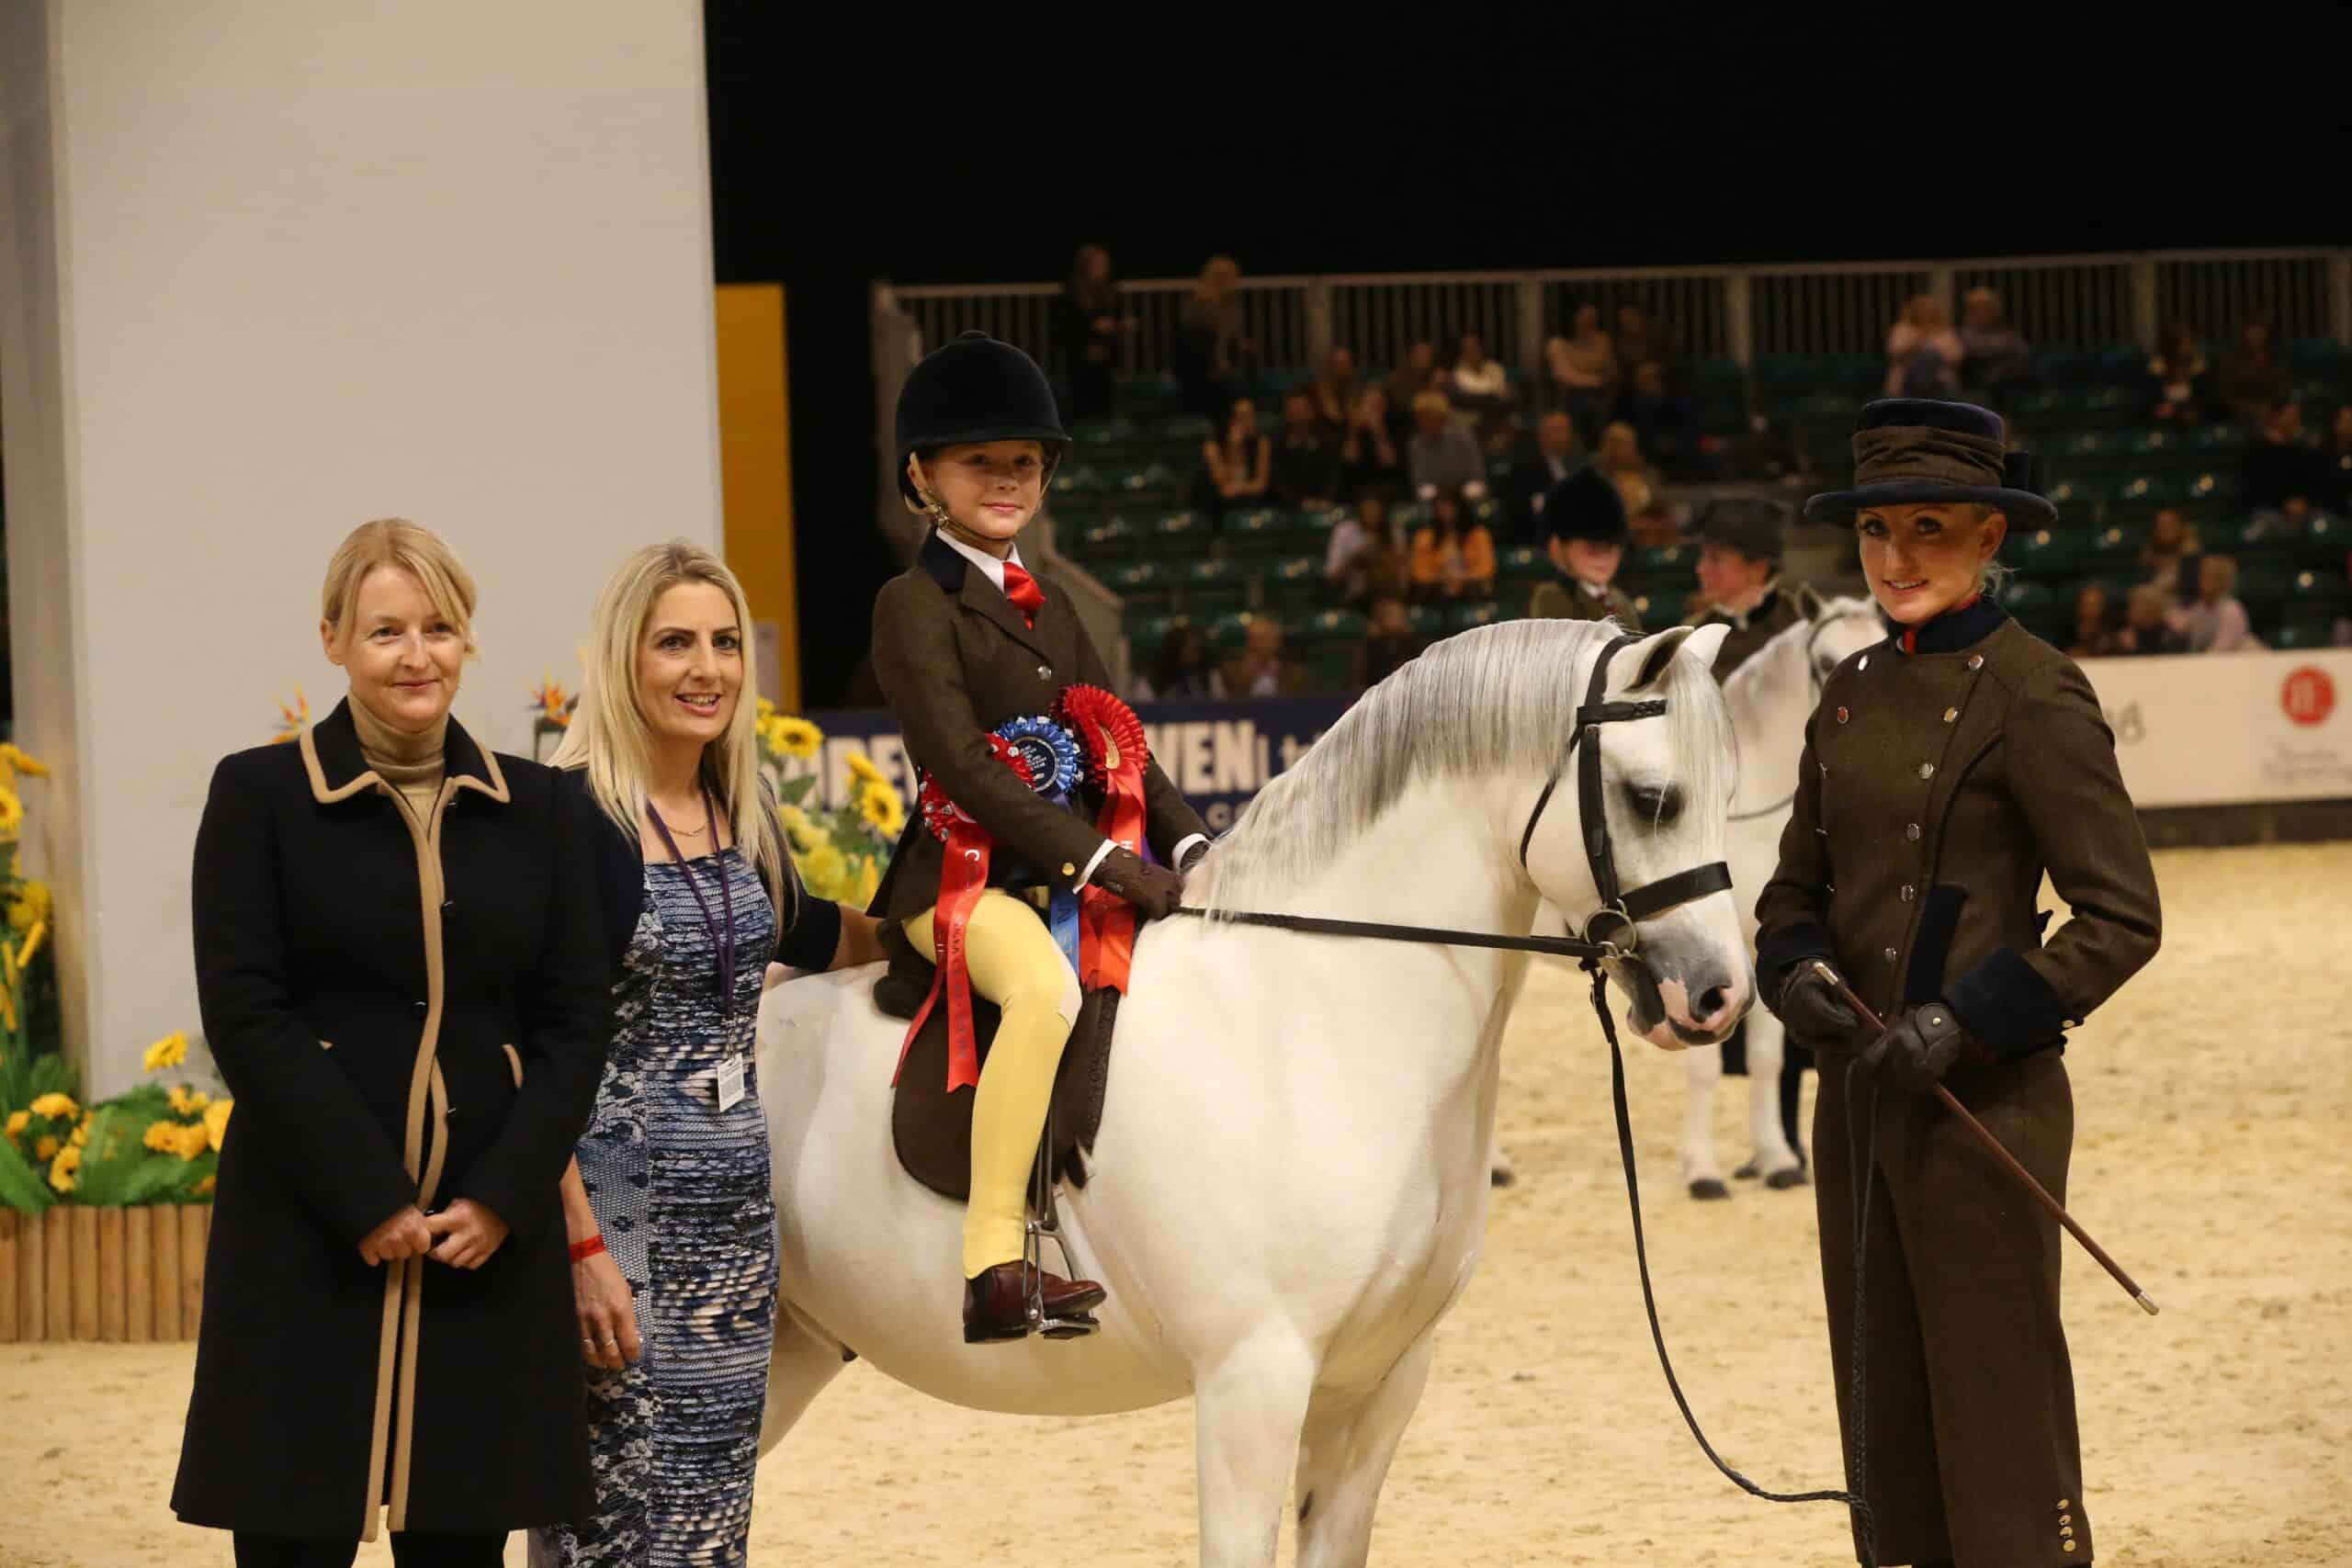 Horse of the Year Show sponsor donates tickets to children’s charity